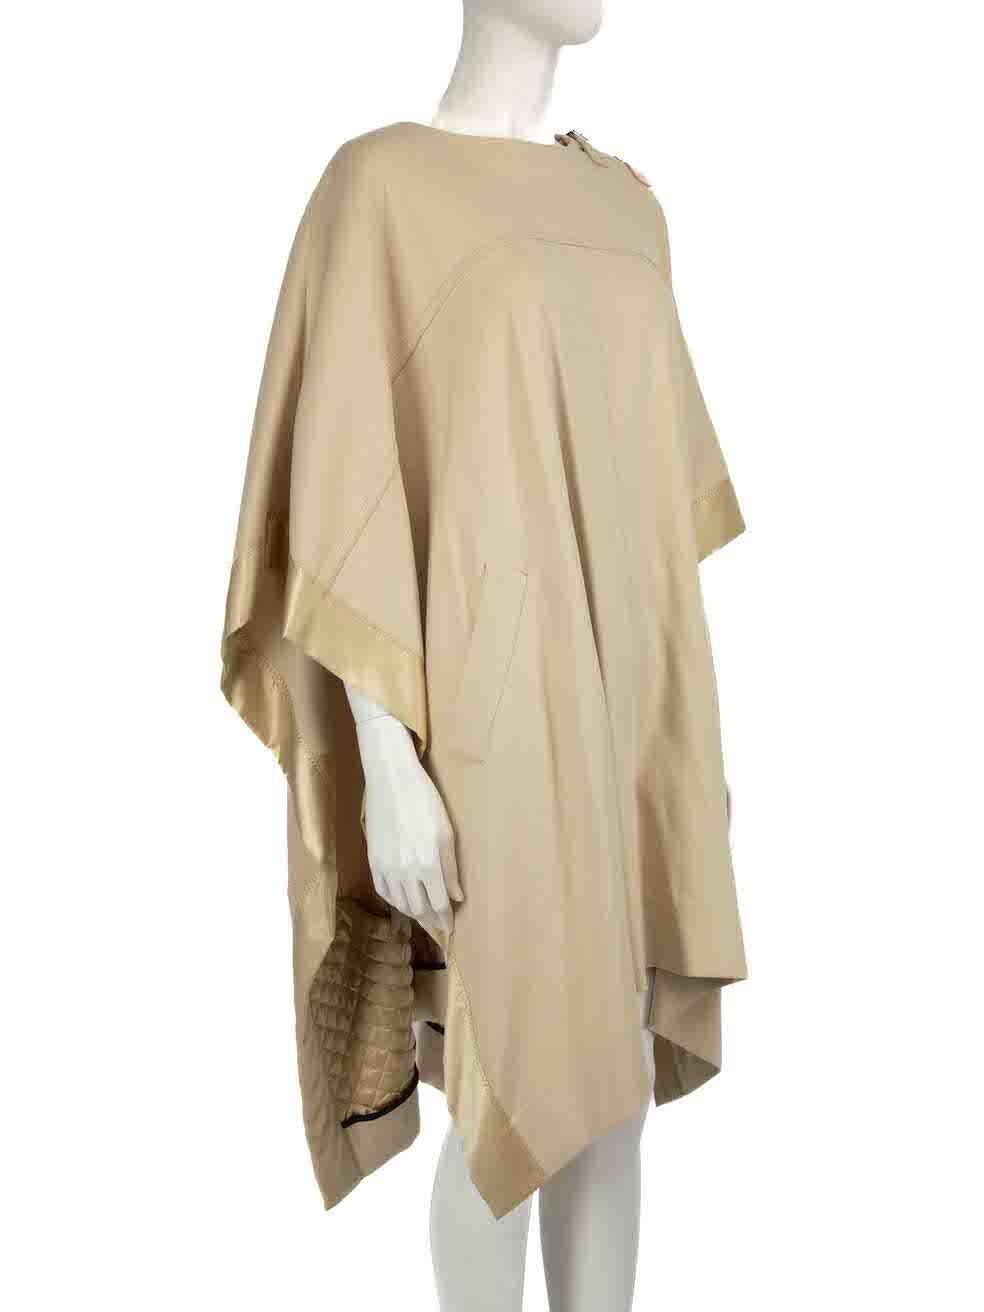 CONDITION is Very good. Minimal wear to ponchos evident. Minimal wear to the fabric surface with a couple of very small discoloured marks and plucks to the weave over the shoulders of this used Chloé designer resale item.
 
 
 
 Details
 
 
 Beige
